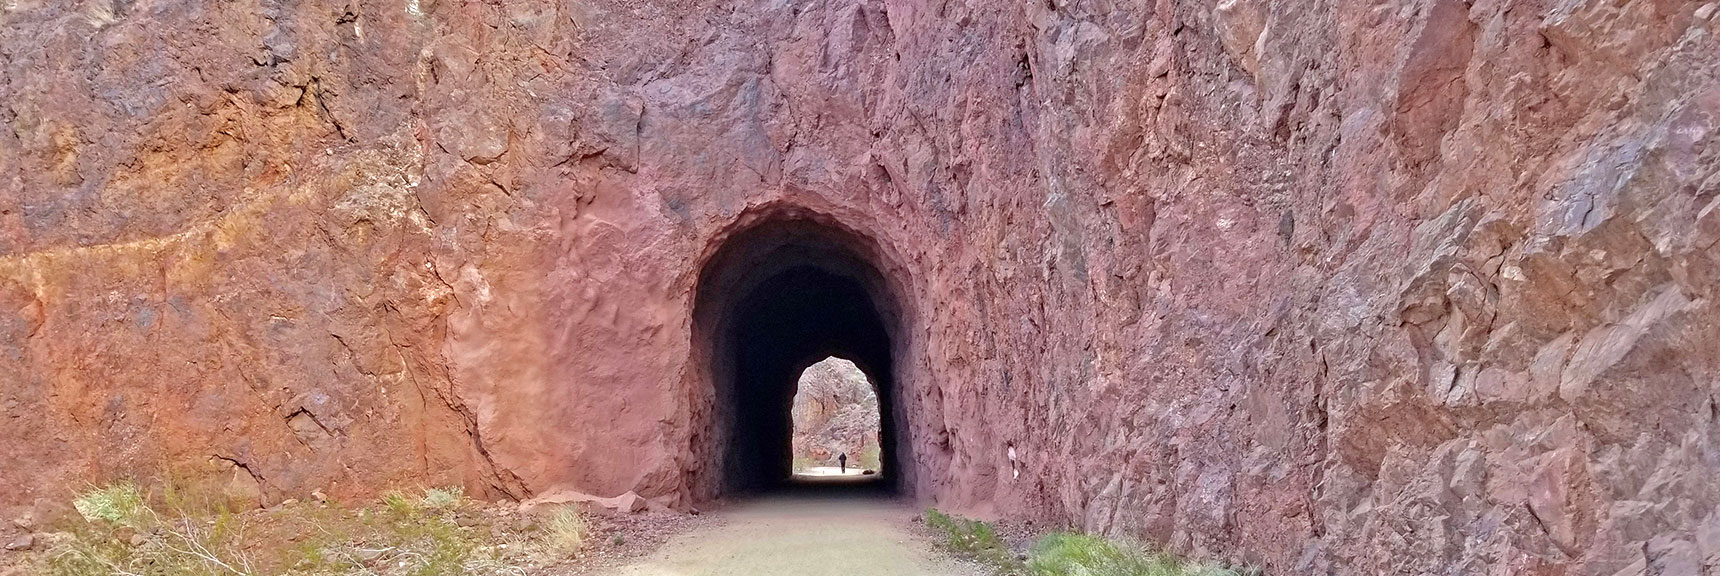 Passing Back Through the Railroad Tunnels, Better Lighting at This Time | Historic Railroad Trail | Lake Mead National Recreation Area, Nevada